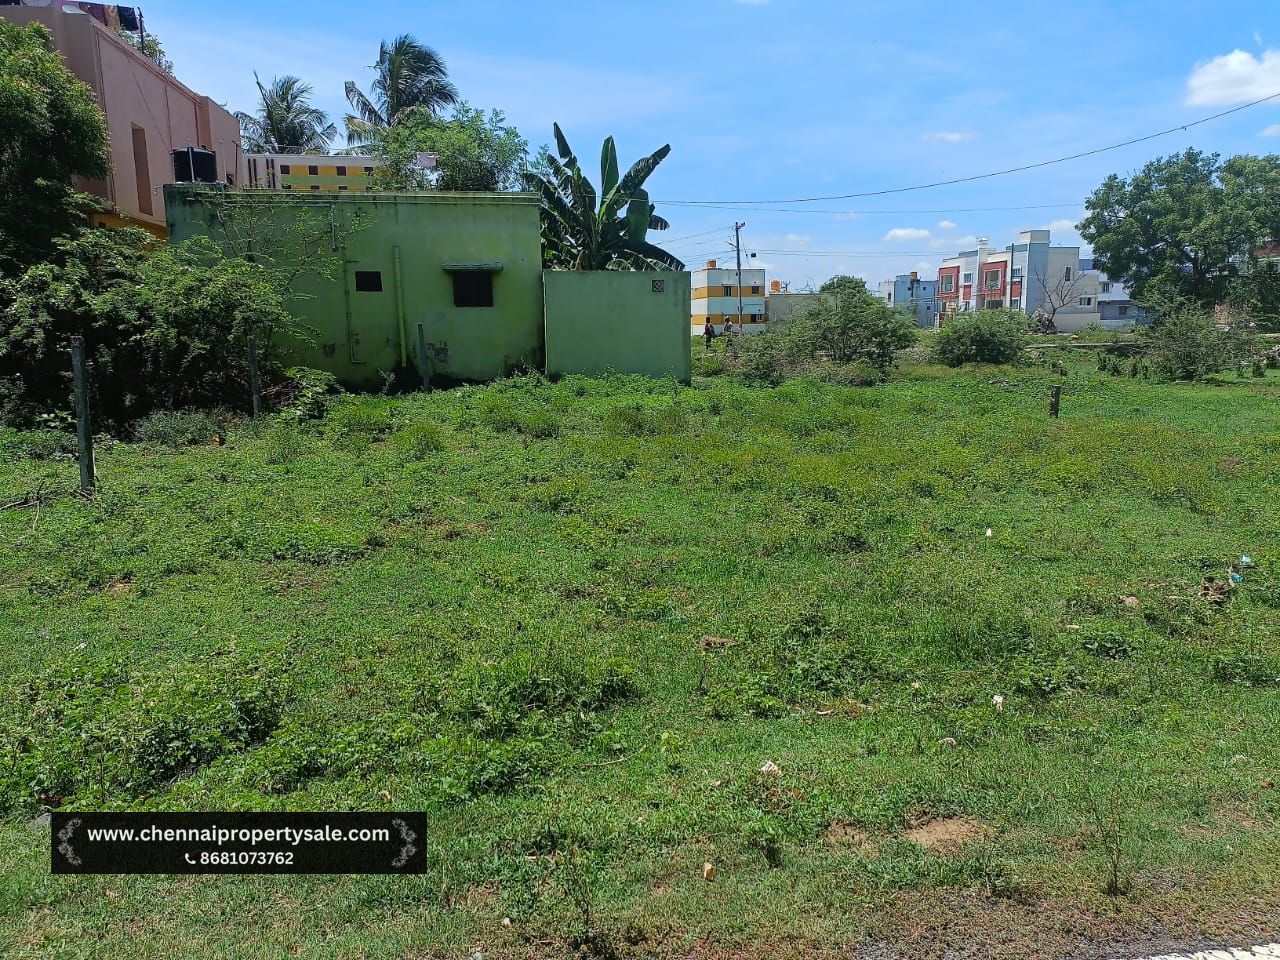 Vacant Land Sale in Kundrathur